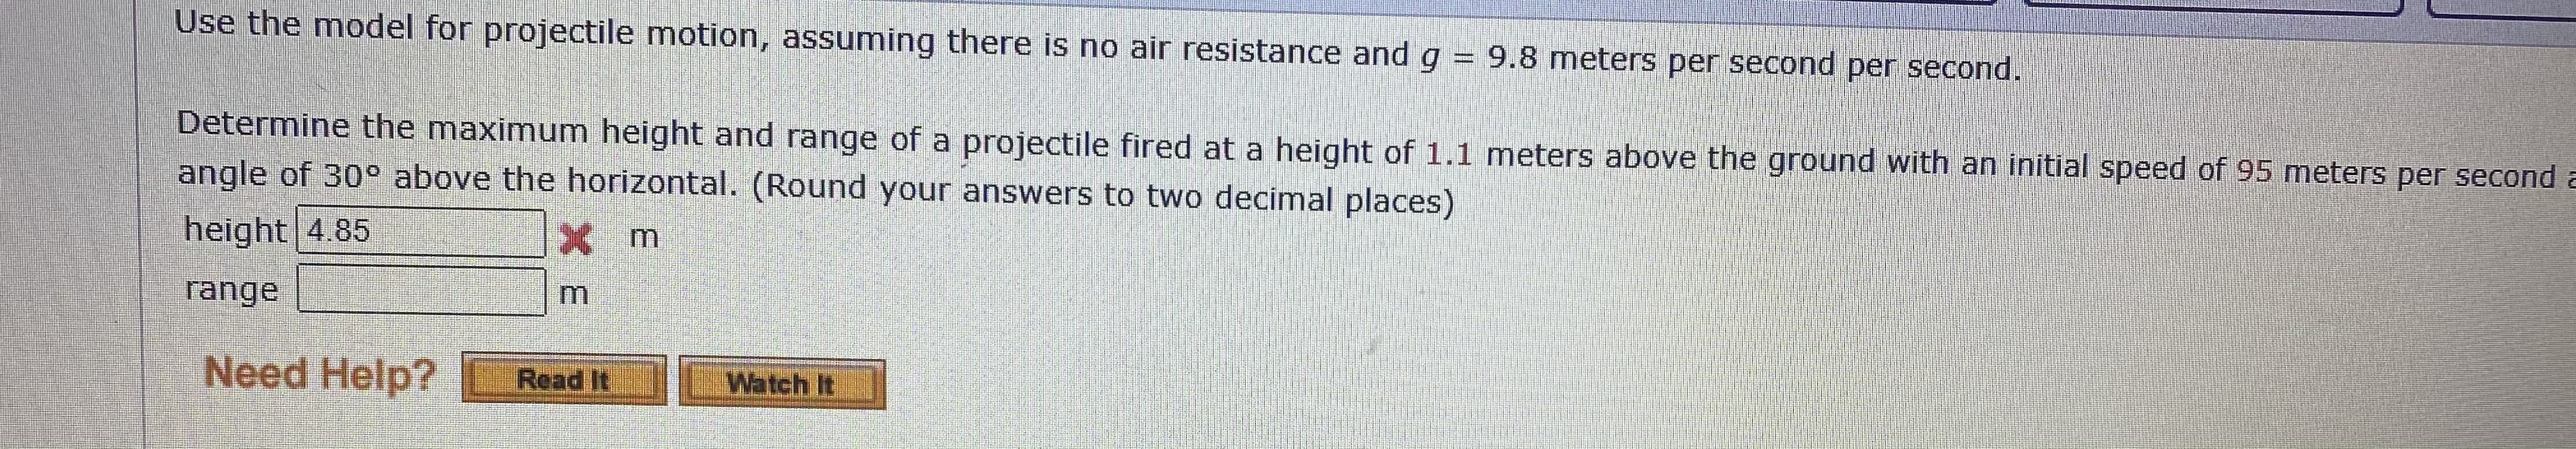 Determine the maximum height and range of a projectile fired at a height of 1.1 meters above the ground with an initial speed of 95 meters per secone
angle of 30° above the horizontal. (Round your answers to two decimal places)
height 4.85
Xm
range
